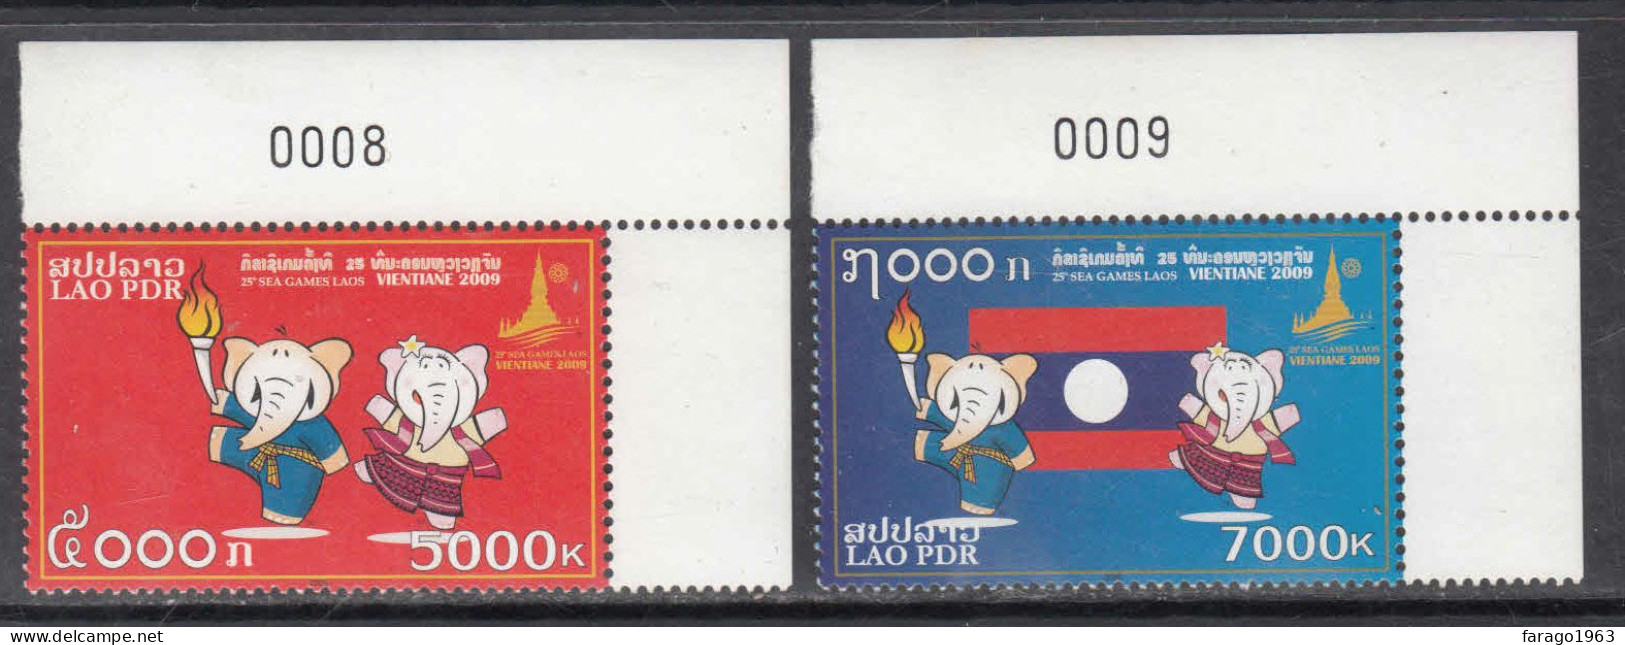 2009 Laos South East Asian Games Flags Complete Set Of 2 MNH - Laos